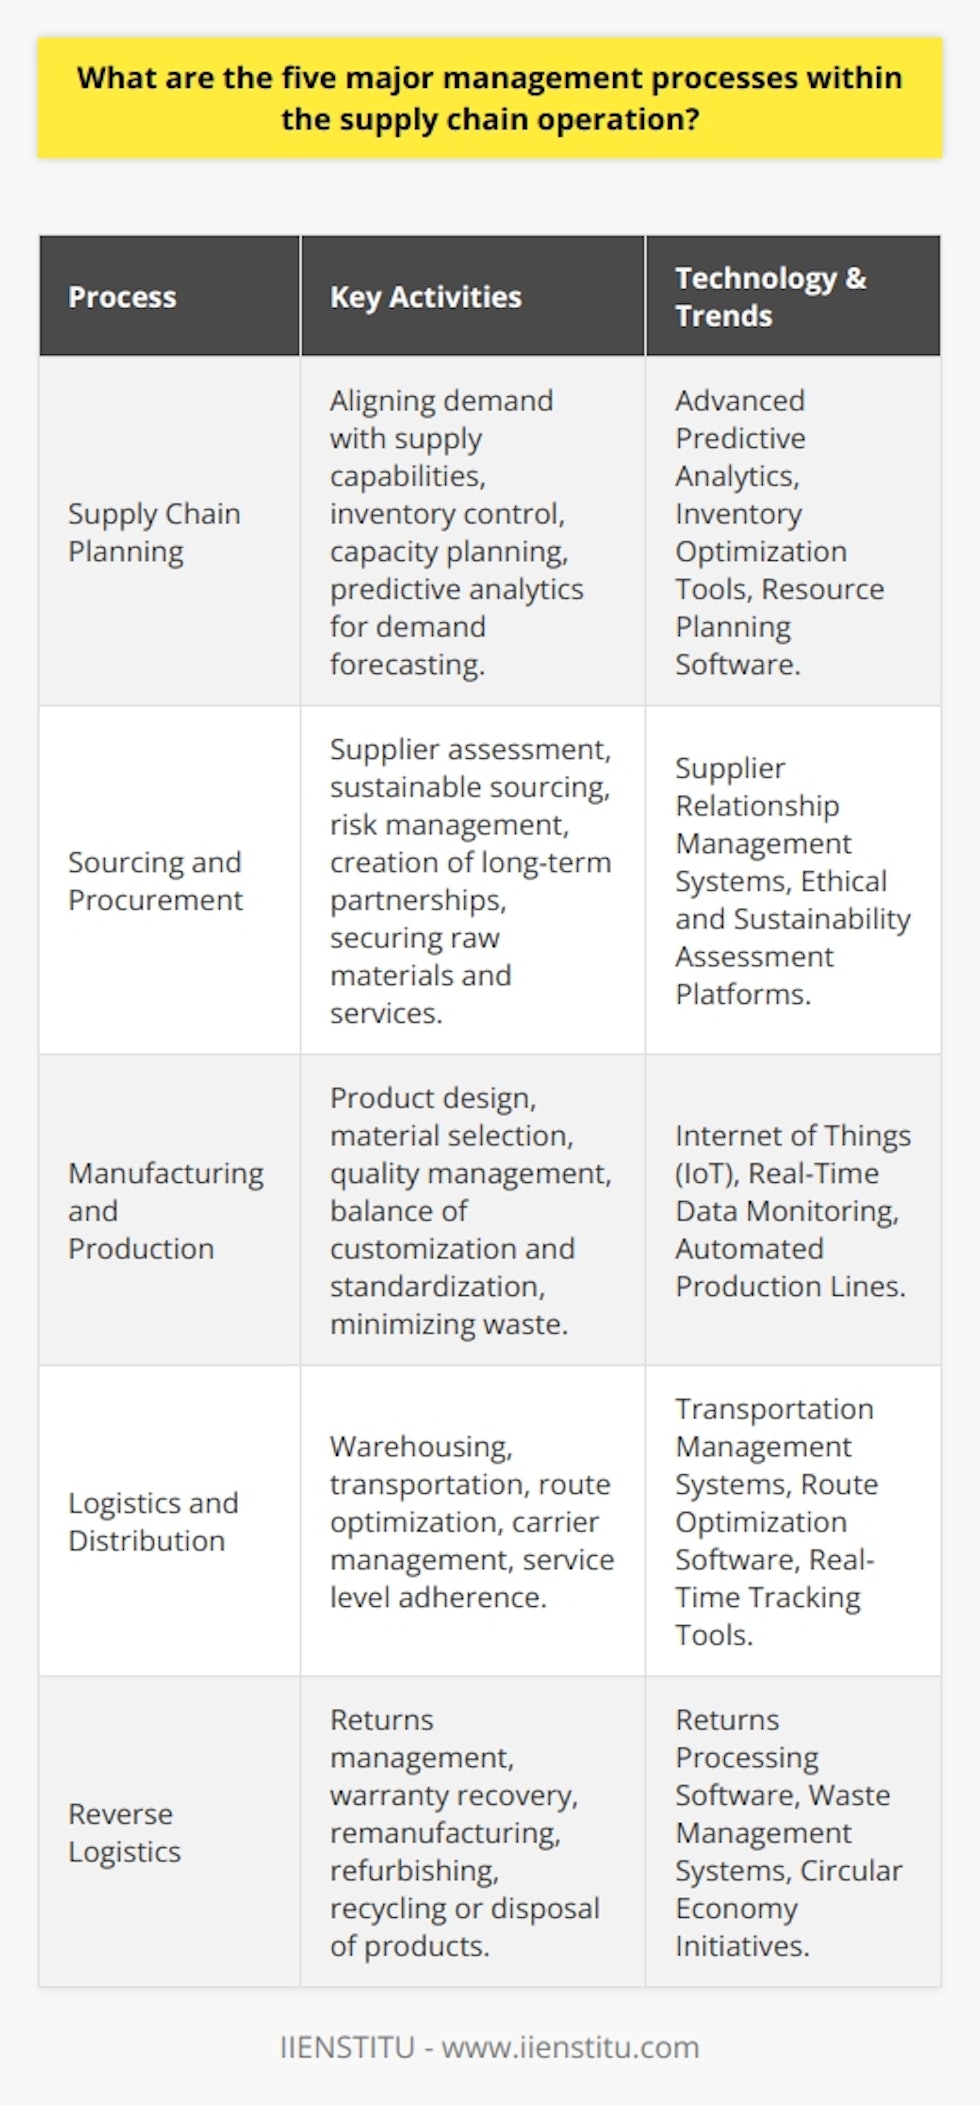 Five Key Management Processes in Supply Chain Operations**1. Supply Chain Planning**At the core of supply chain operations is supply chain planning, a crucial process for aligning demand with supply capabilities. It forms the strategic blueprint for managing the balance between customer requirements and the efficient supply of products. Supply chain planning involves sophisticated techniques like predictive analytics for demand forecasting, which helps organizations anticipate consumer behavior and seasonal trends. This predictive power allows for better inventory control, avoiding both shortages and excess. Moreover, capacity planning ensures that production schedules are optimized, and resources like labor and machinery are effectively utilized, reducing operational costs while improving throughput.**2. Sourcing and Procurement**Effective supply chain management hinges on robust sourcing and procurement strategies. These strategies are tailored to secure the best possible sources of raw materials and services, considering factors like cost, quality, and reliability. This phase involves rigorous supplier assessment and selection processes, often taking into account their sustainability practices and ethical standards. Long-term partnerships may be formed to gain more favorable terms and ensure supply continuity, which can be vital for maintaining a competitive edge. Risk management is integral during this phase, where companies must anticipate and mitigate potential supply disruptions or changes in market conditions.**3. Manufacturing and Production**Manufacturing and production are the transformative heart of the supply chain, where inputs become the outputs desired by the market. This process starts with meticulous product design, selecting suitable materials and defining quality benchmarks. Real-time data and the integration of technologies like the internet of things (IoT) can significantly improve the efficiency of production lines, minimizing waste and reducing cycle times. Effective production management balances the trade-offs between customized production and standardization, aiming for flexibility to cater to varying customer demands while maintaining efficiency.**4. Logistics and Distribution**The effective movement of goods is pivotal in the supply chain, and logistics and distribution ensure that this movement is both cost-effective and meets service level agreements. This process involves decisions on warehousing, choice of transportation modes, route optimization, and carrier management. A key trend in modern logistics is the utilization of technology for better traceability of goods, enhancing transparency, and strengthening the integrity of the supply chain. Data analytics plays a significant role in forecasting optimal inventory levels, thus ensuring that products are available when and where they are needed without tying up excess capital.**5. Reverse Logistics**Contrary to traditional supply chain flows, reverse logistics efficiently manages the return or disposition of products post-consumption. This includes returns management, warranty recovery, remanufacturing, refurbishing, and responsible recycling or disposal. Reverse logistics has become increasingly significant as both consumers and regulatory bodies demand greater corporate responsibility in terms of sustainability. Implementing an effective reverse logistics process can contribute to a circular economy by extending the lifecycle of products and reducing environmental footprints.Each of the above processes can be enhanced by leveraging specialized knowledge and platforms offered by entities like IIENSTITU, which provides tailored training and tools to optimize supply chain operations. Furthermore, integrating these processes holistically is key to achieving a resilient and responsive supply chain capable of delivering competitive advantage and customer satisfaction.